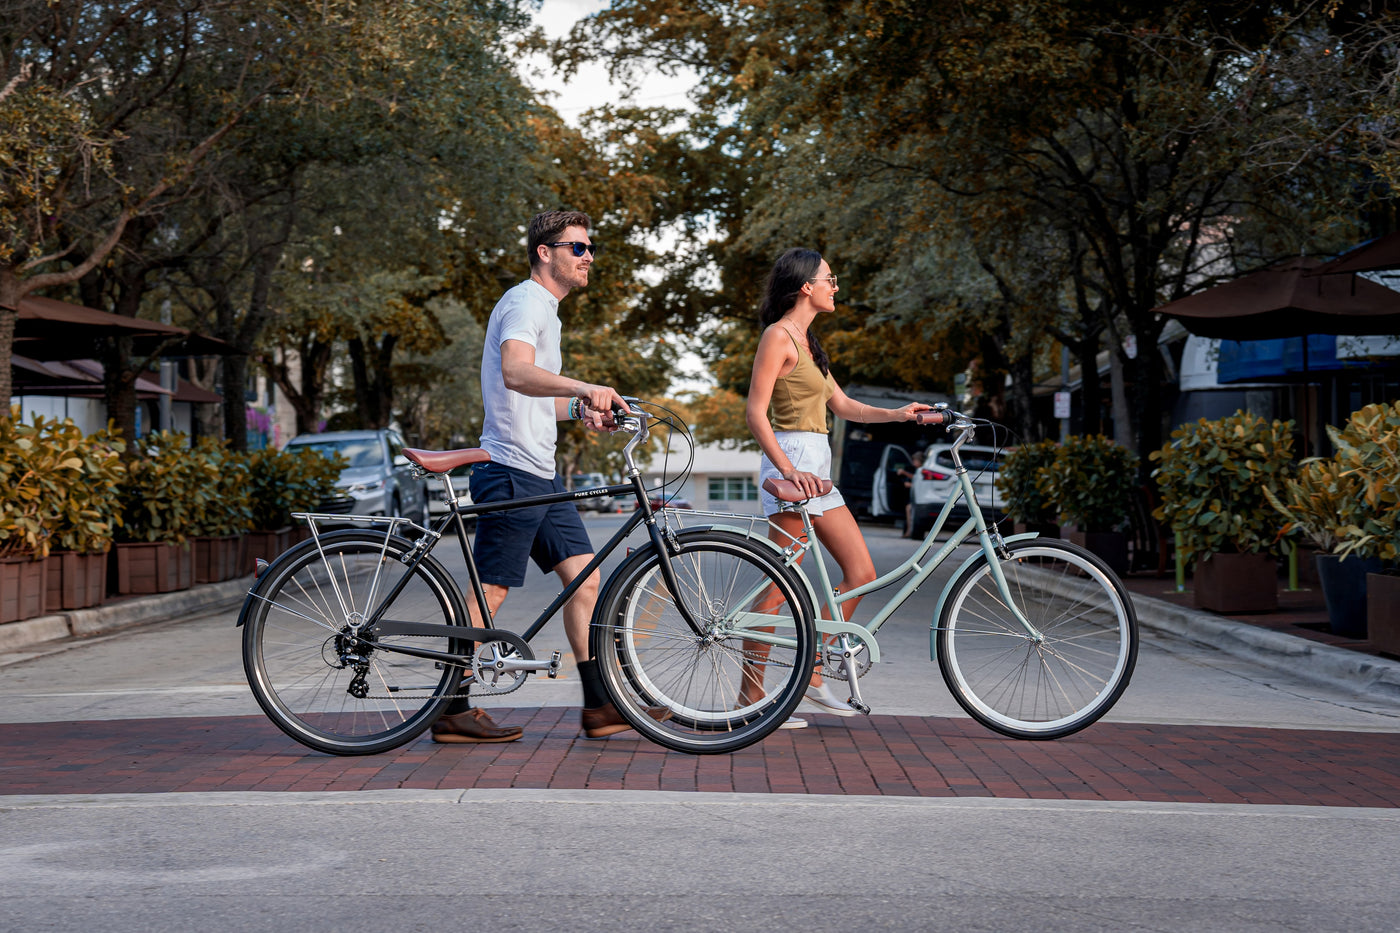 Commuters, Fixed Gear, Single Speed, and Geared bikes for only $249